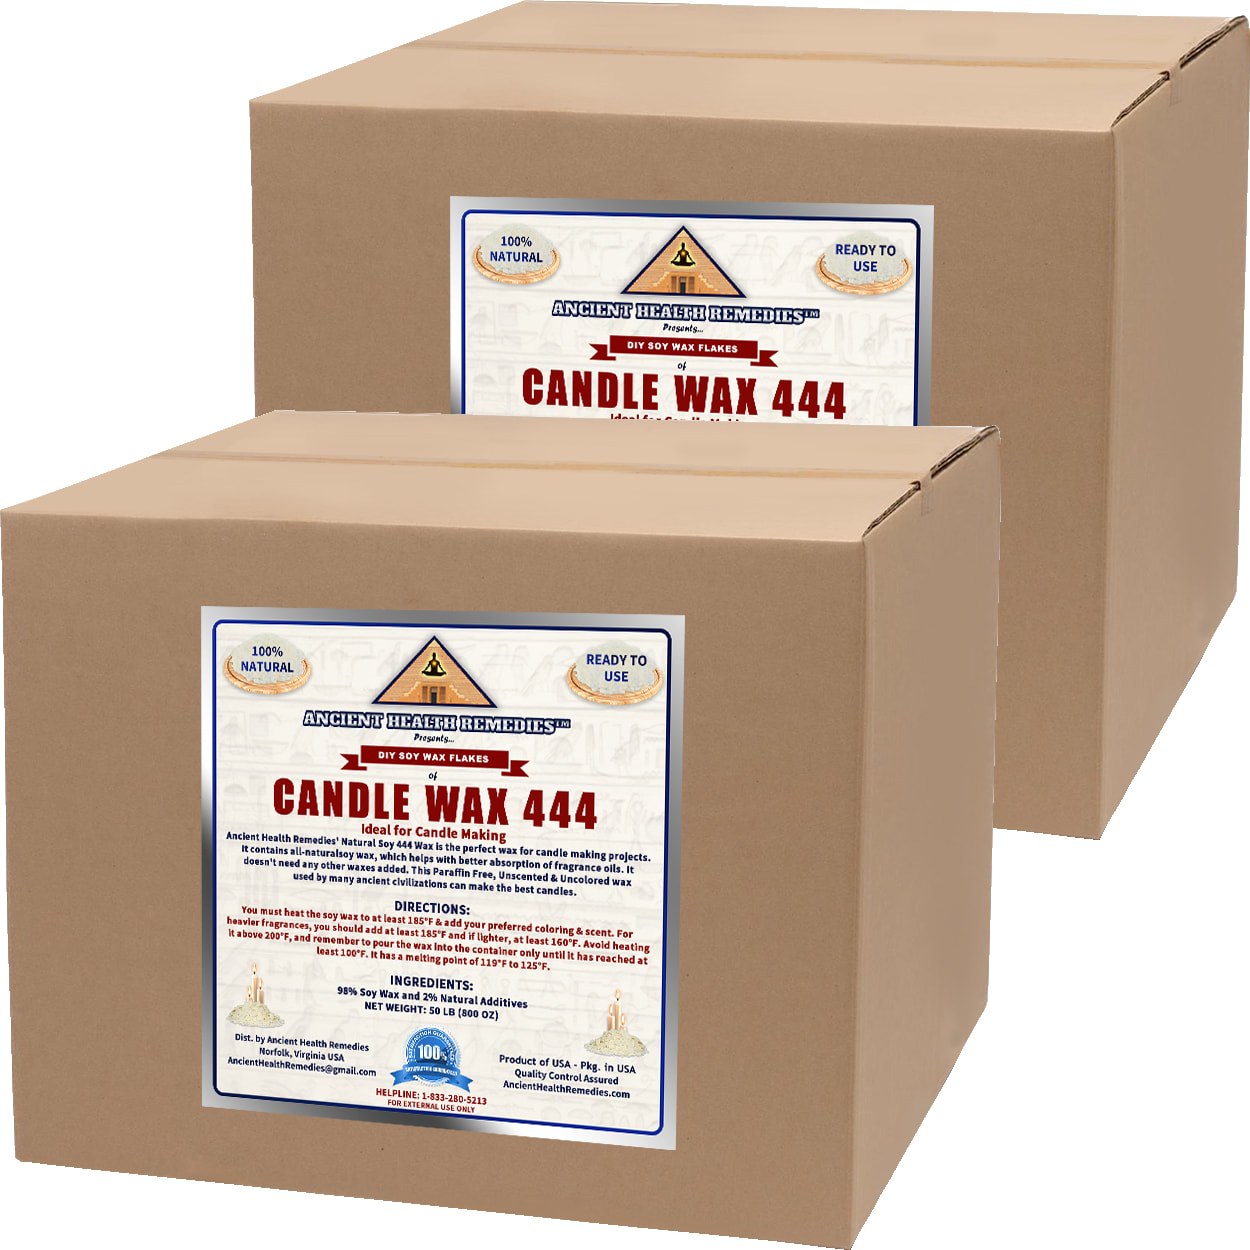 Bulk Wax for DIY Projects, Wholesale Candle Wax